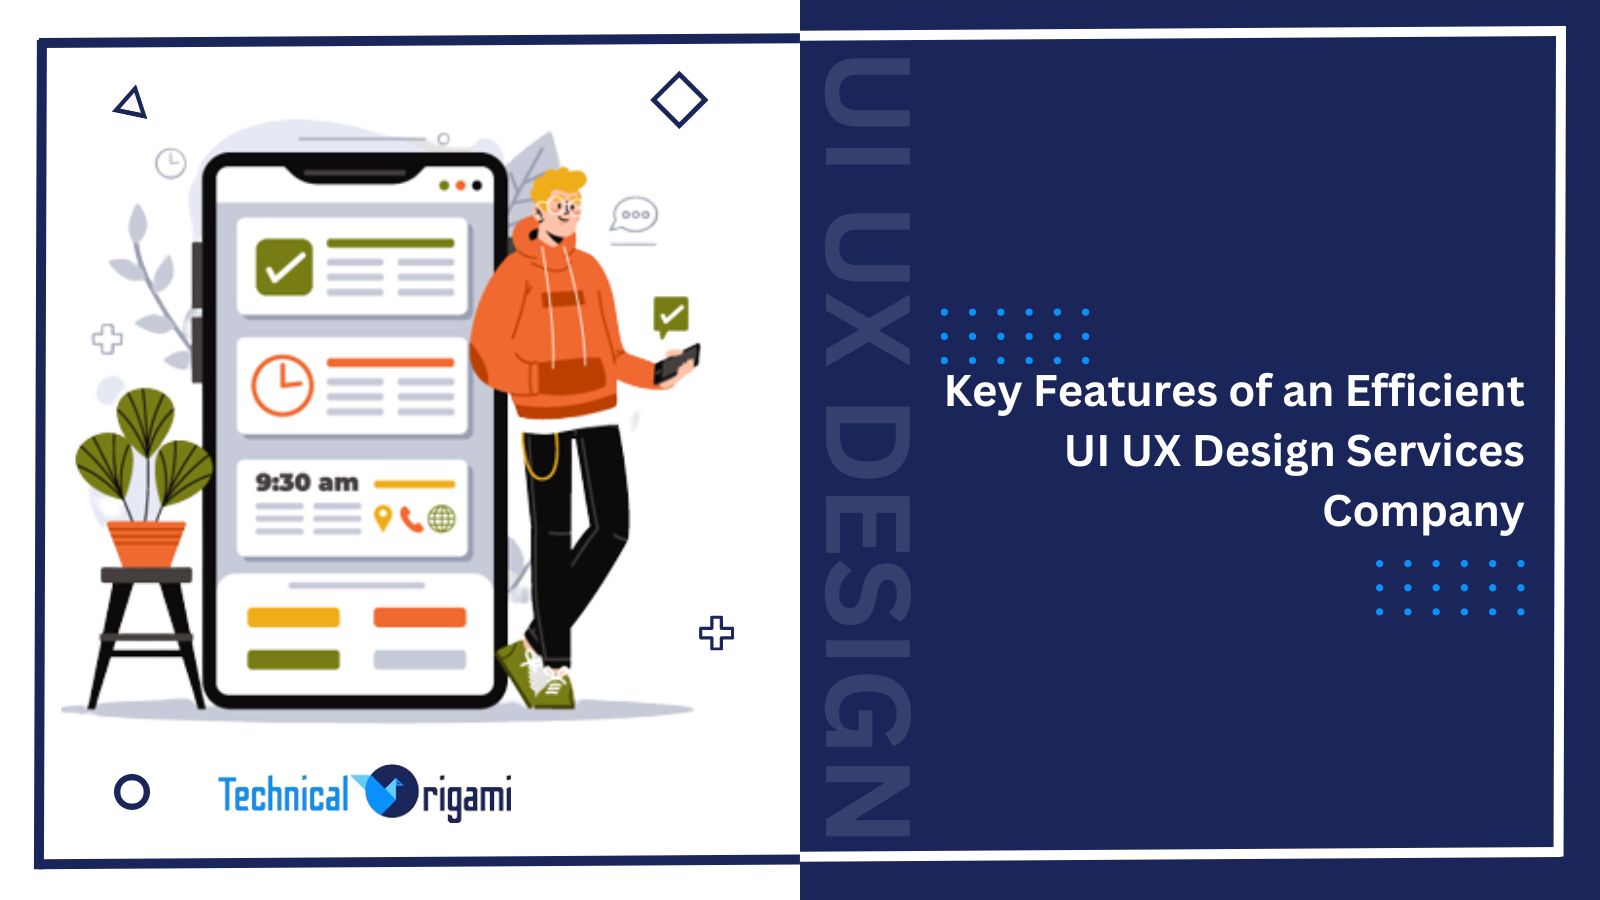 Key Features of an Efficient UI UX Design Services Company